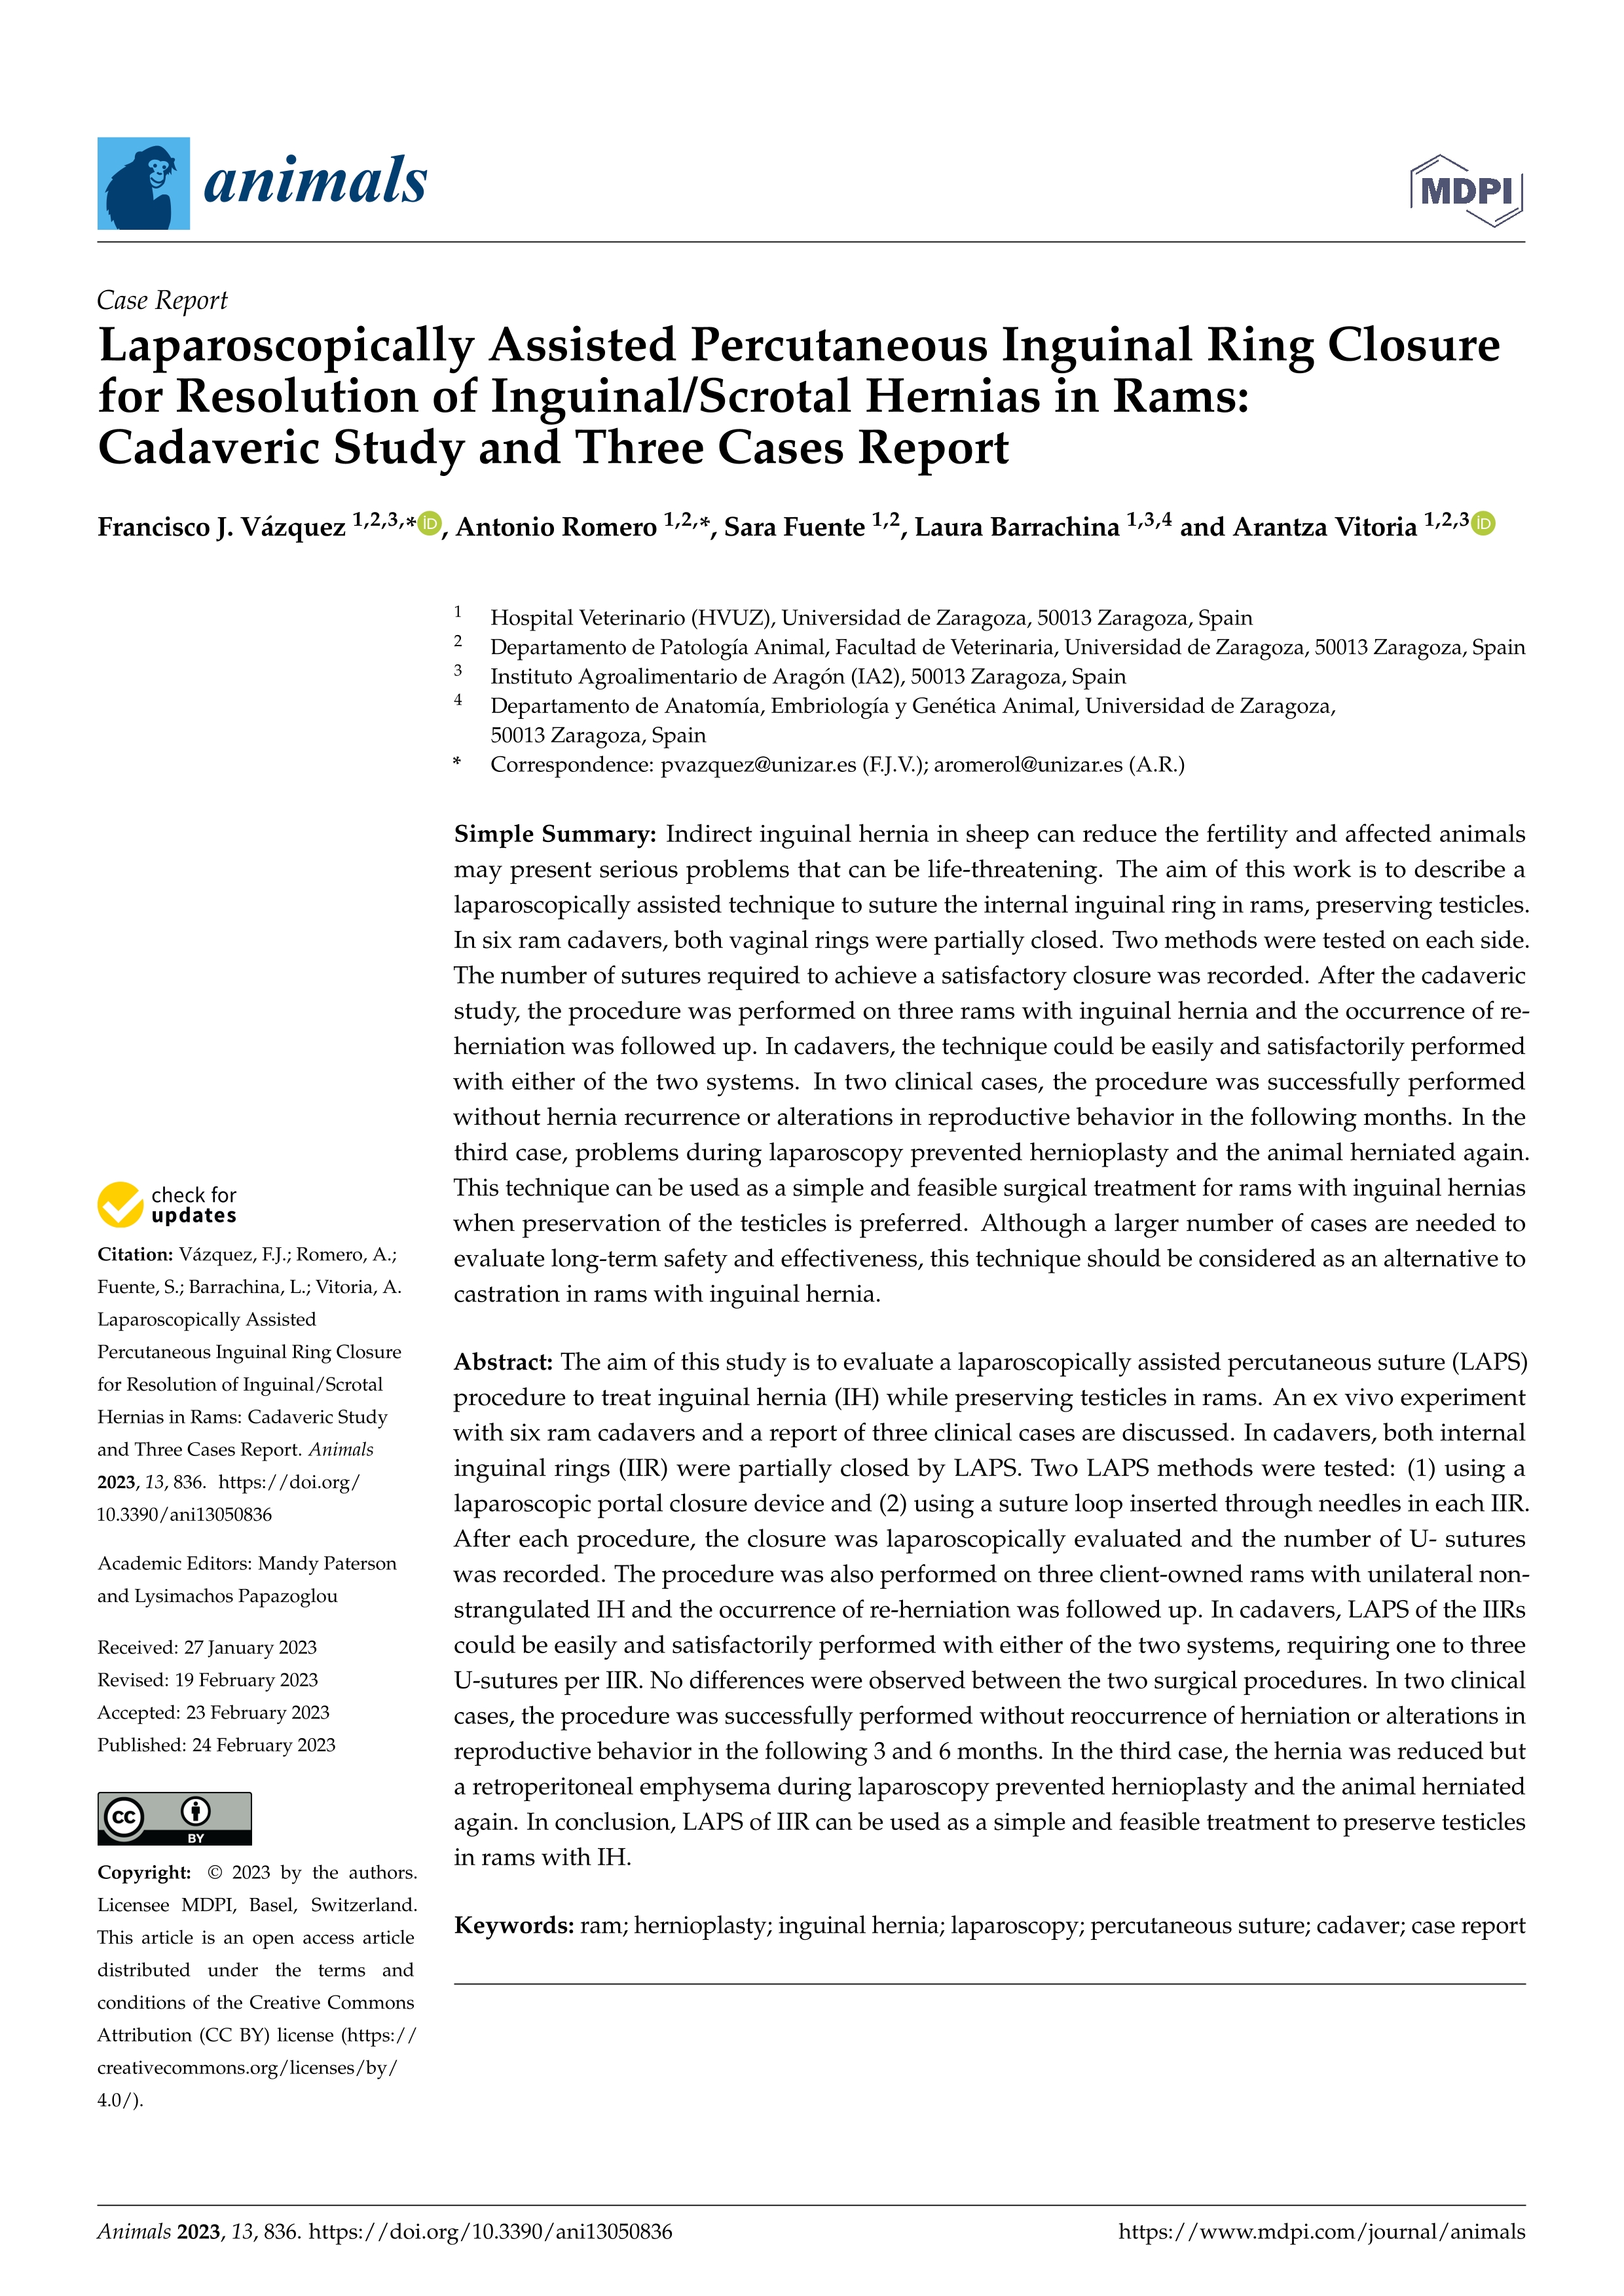 Laparoscopically assisted percutaneous inguinal ring closure for resolution of inguinal/scrotal hernias in rams: cadaveric study and three cases report